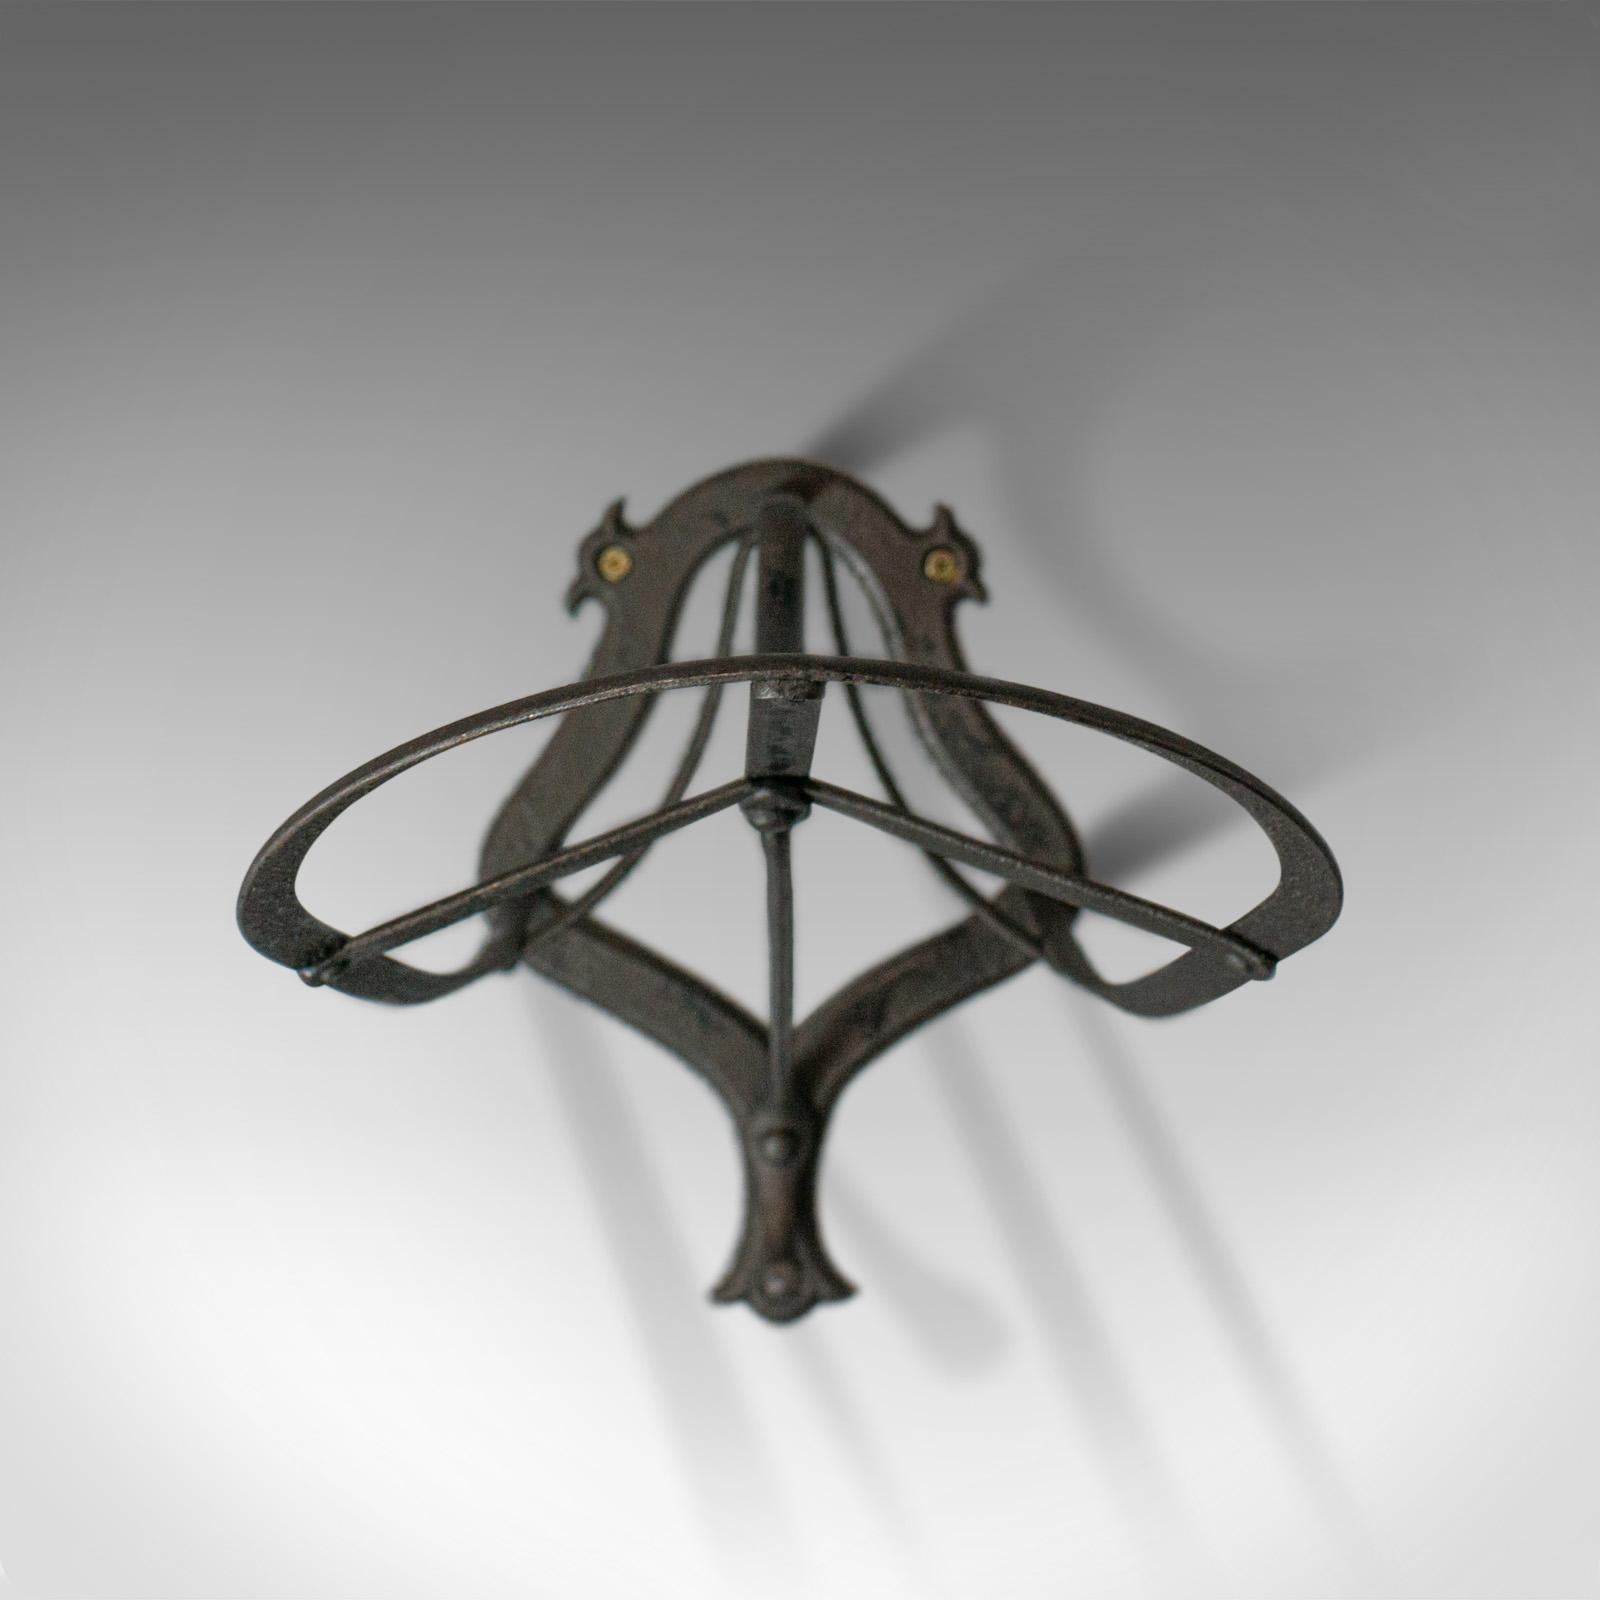 This is an antique saddle rack. An English, Victorian wall-mounted, forged iron rack dating to the turn of the 20th century, circa 1900.

Forged in iron with graphite finish for durable equestrian needs
Good consistent color with a desirable